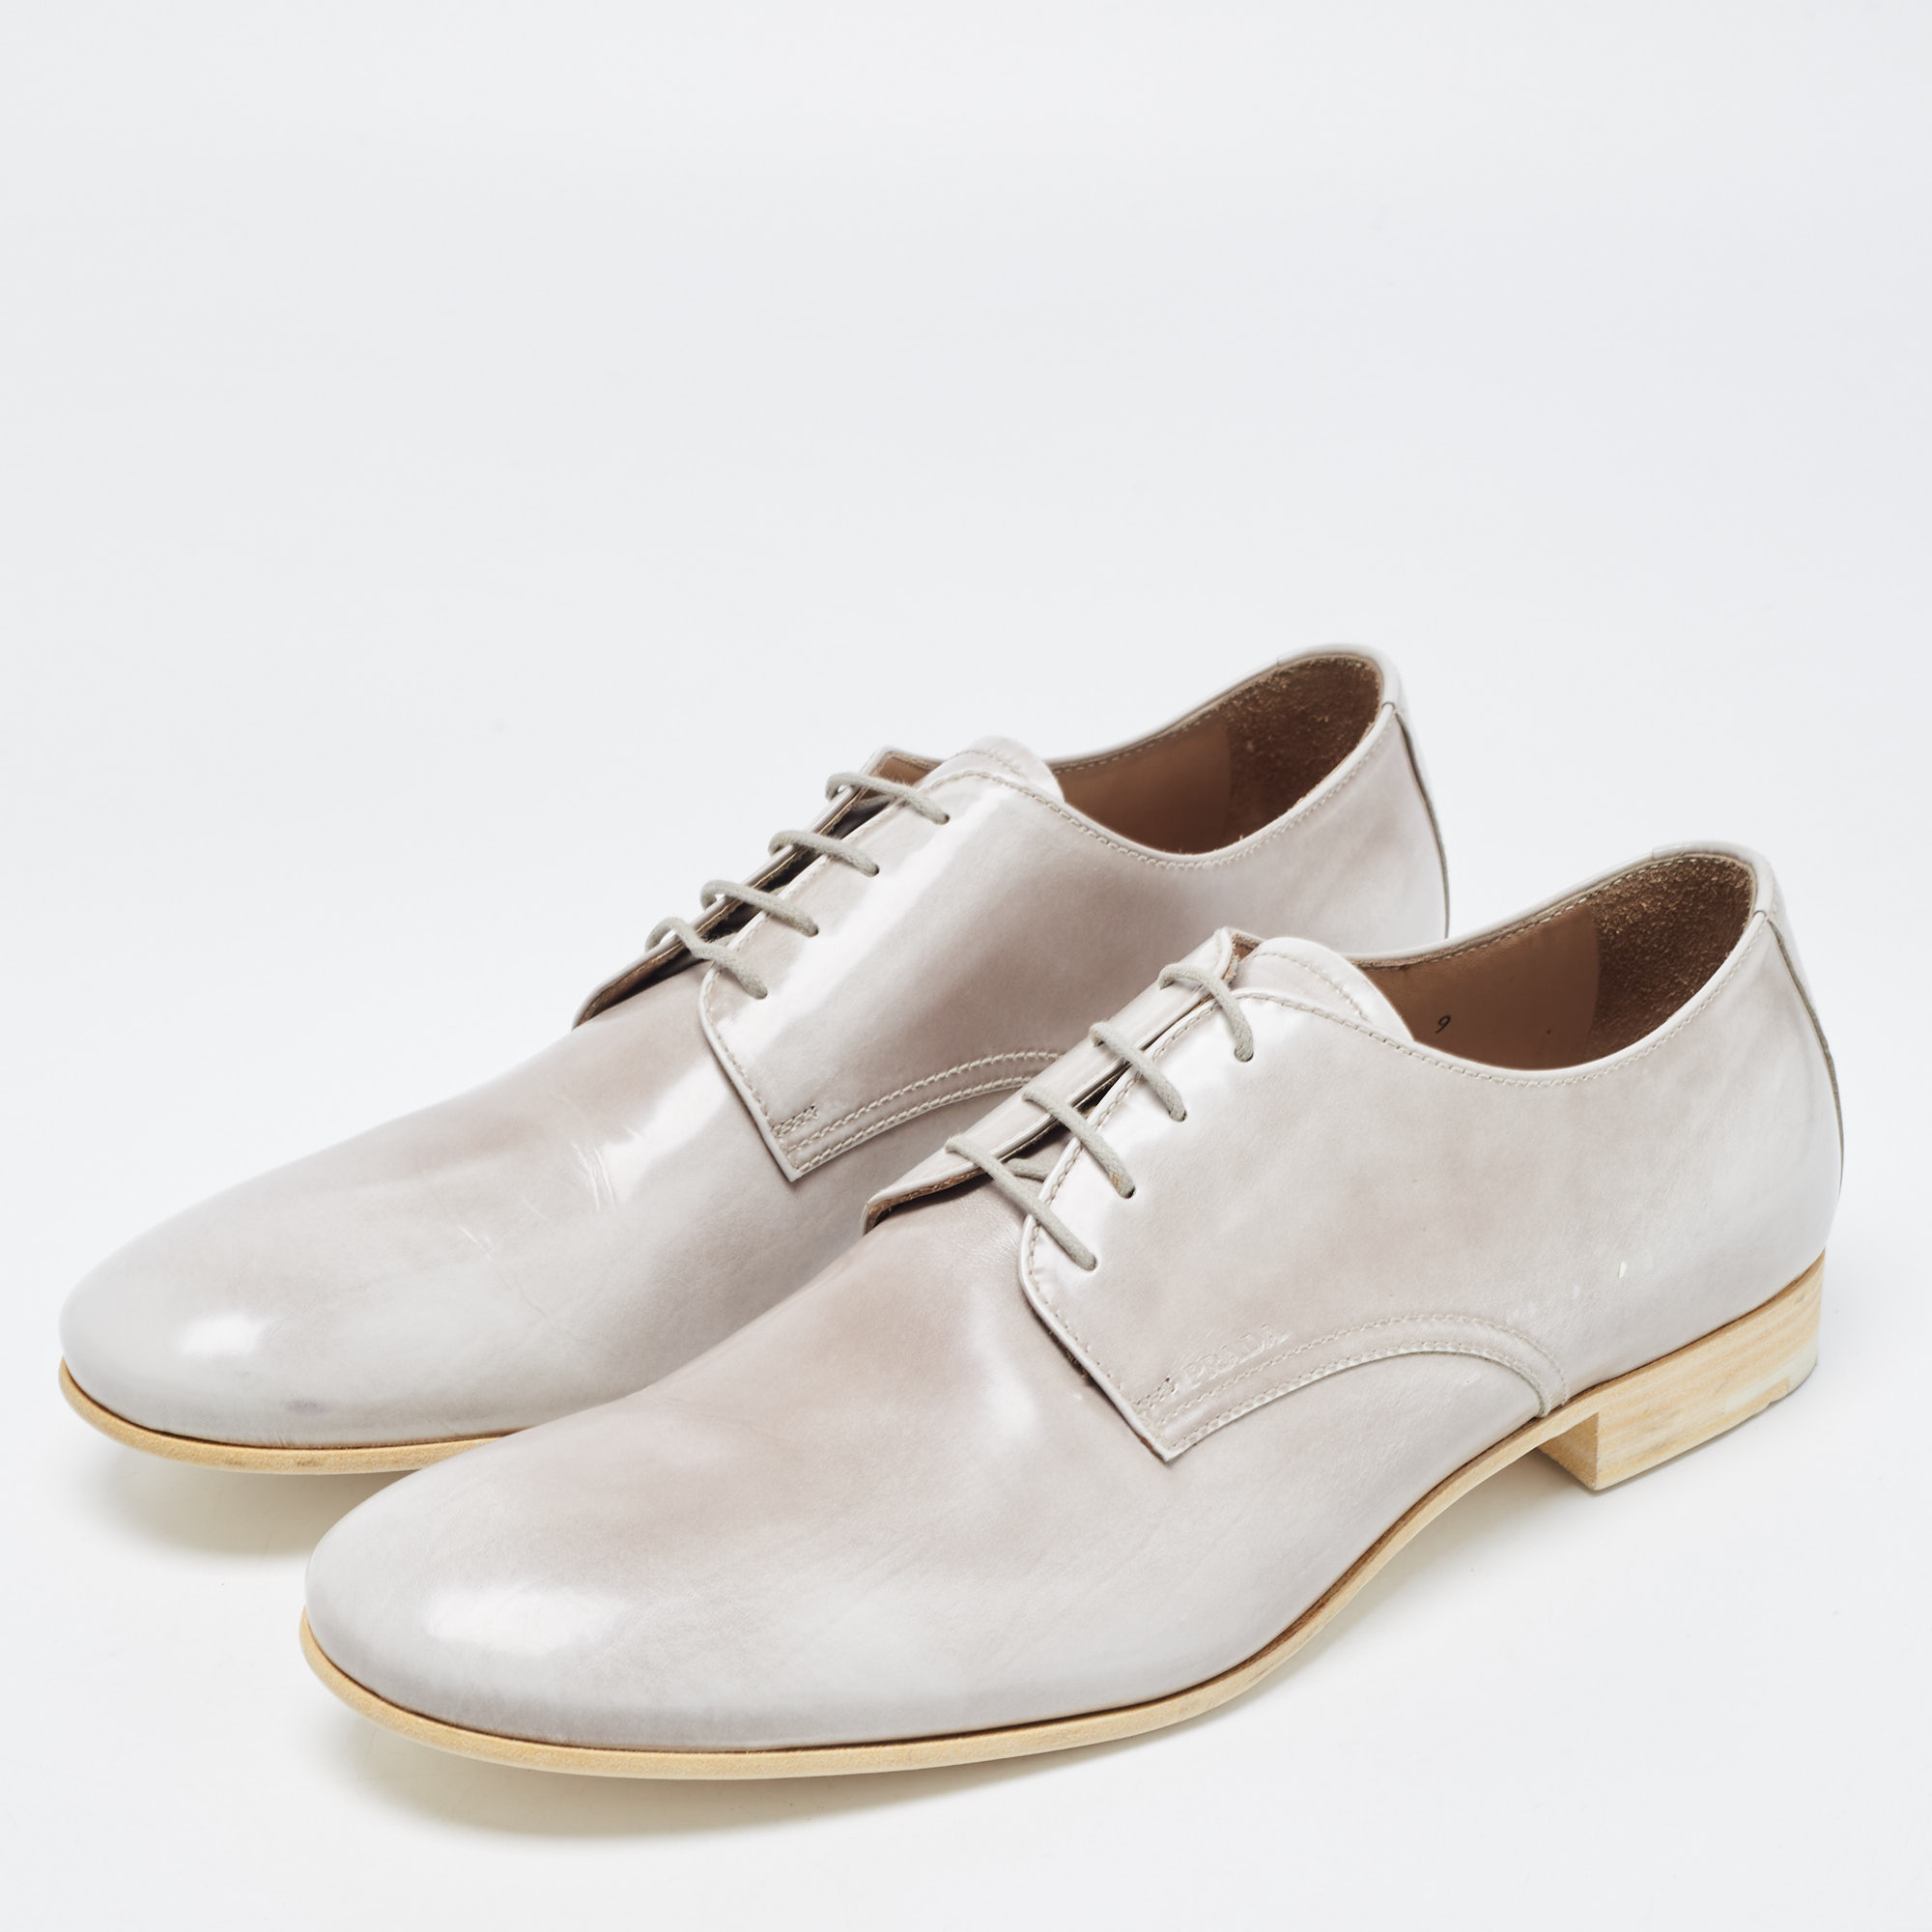 

Prada Grey Patent Leather Lace Up Oxfords Size